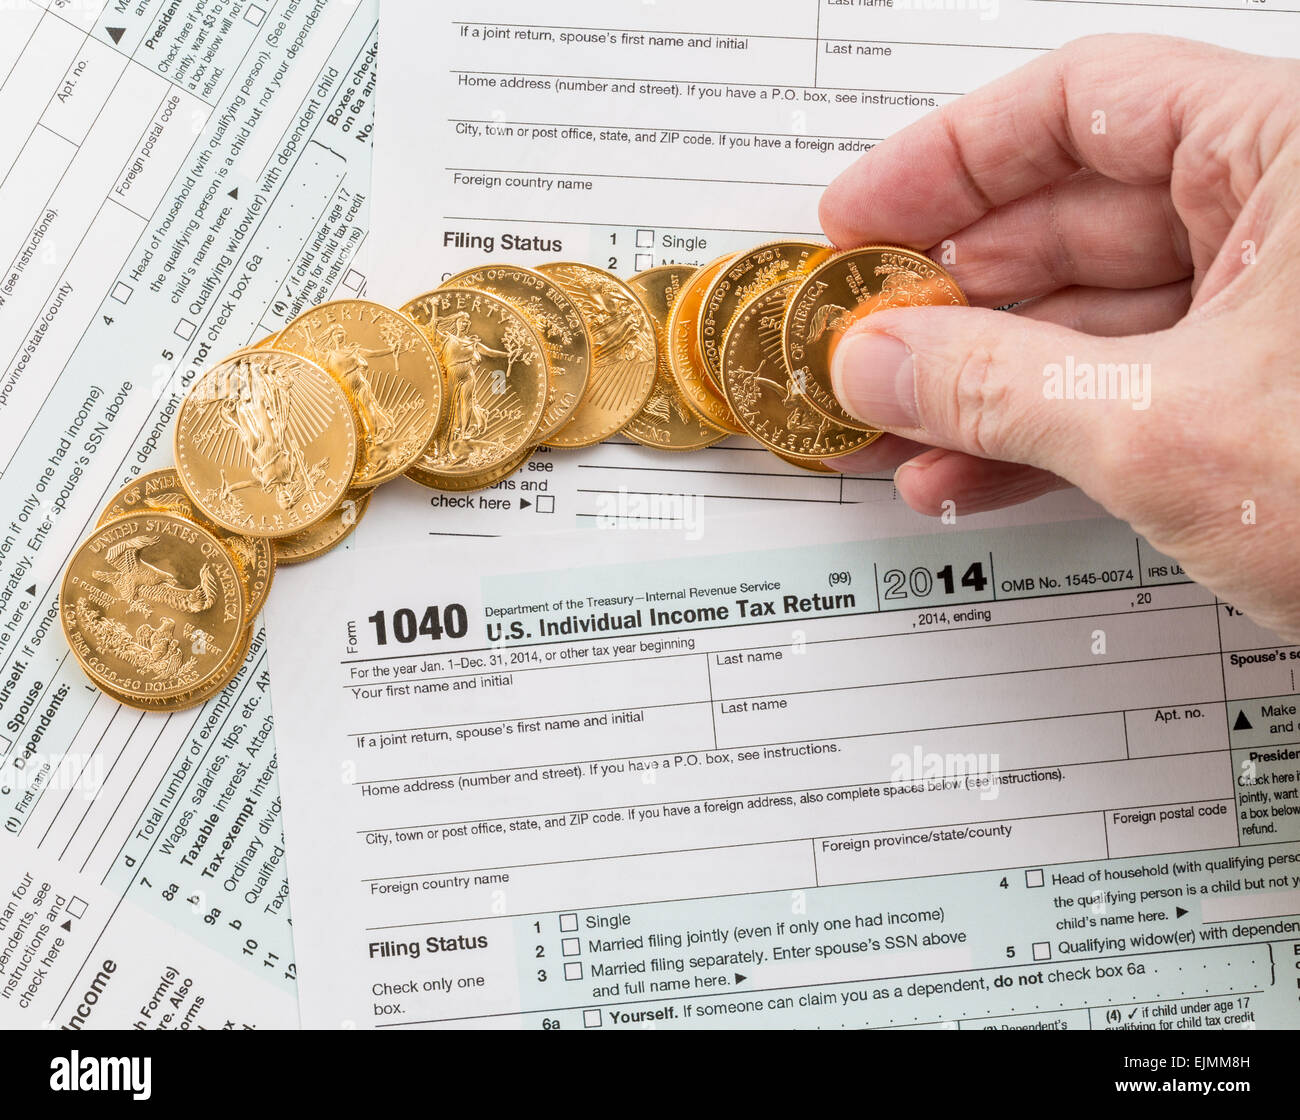 Caucasian hand counting solid gold eagle coins on USA tax form 1040 for year 2014 illustrating payment of taxes to the IRS Stock Photo